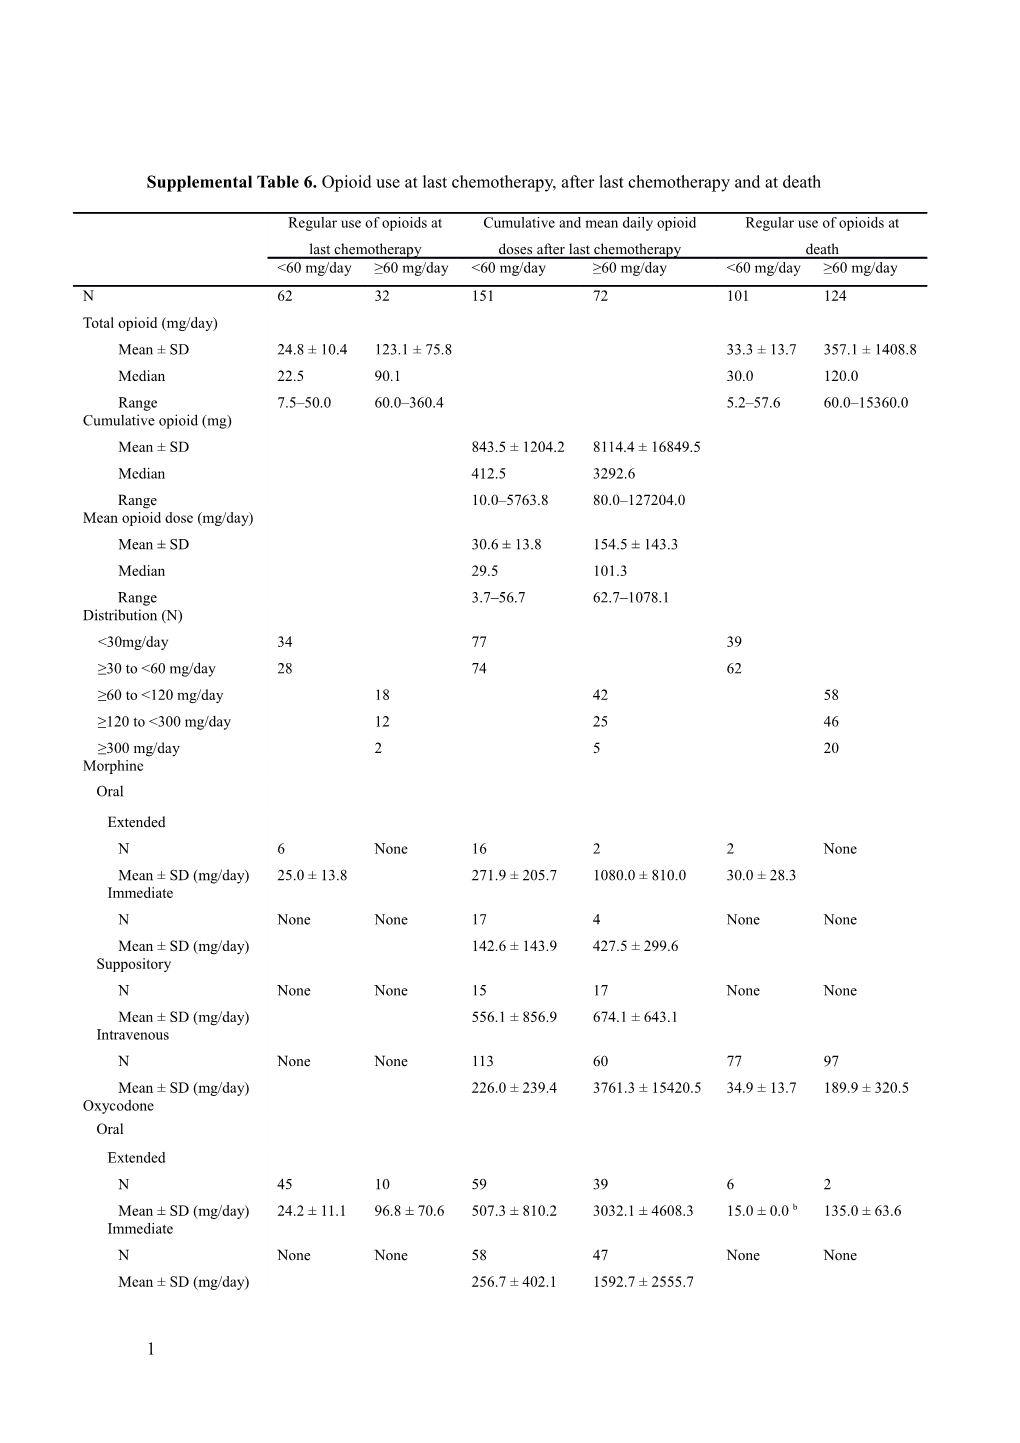 Supplemental Table 6. Opioid Use at Last Chemotherapy, After Last Chemotherapy and at Death